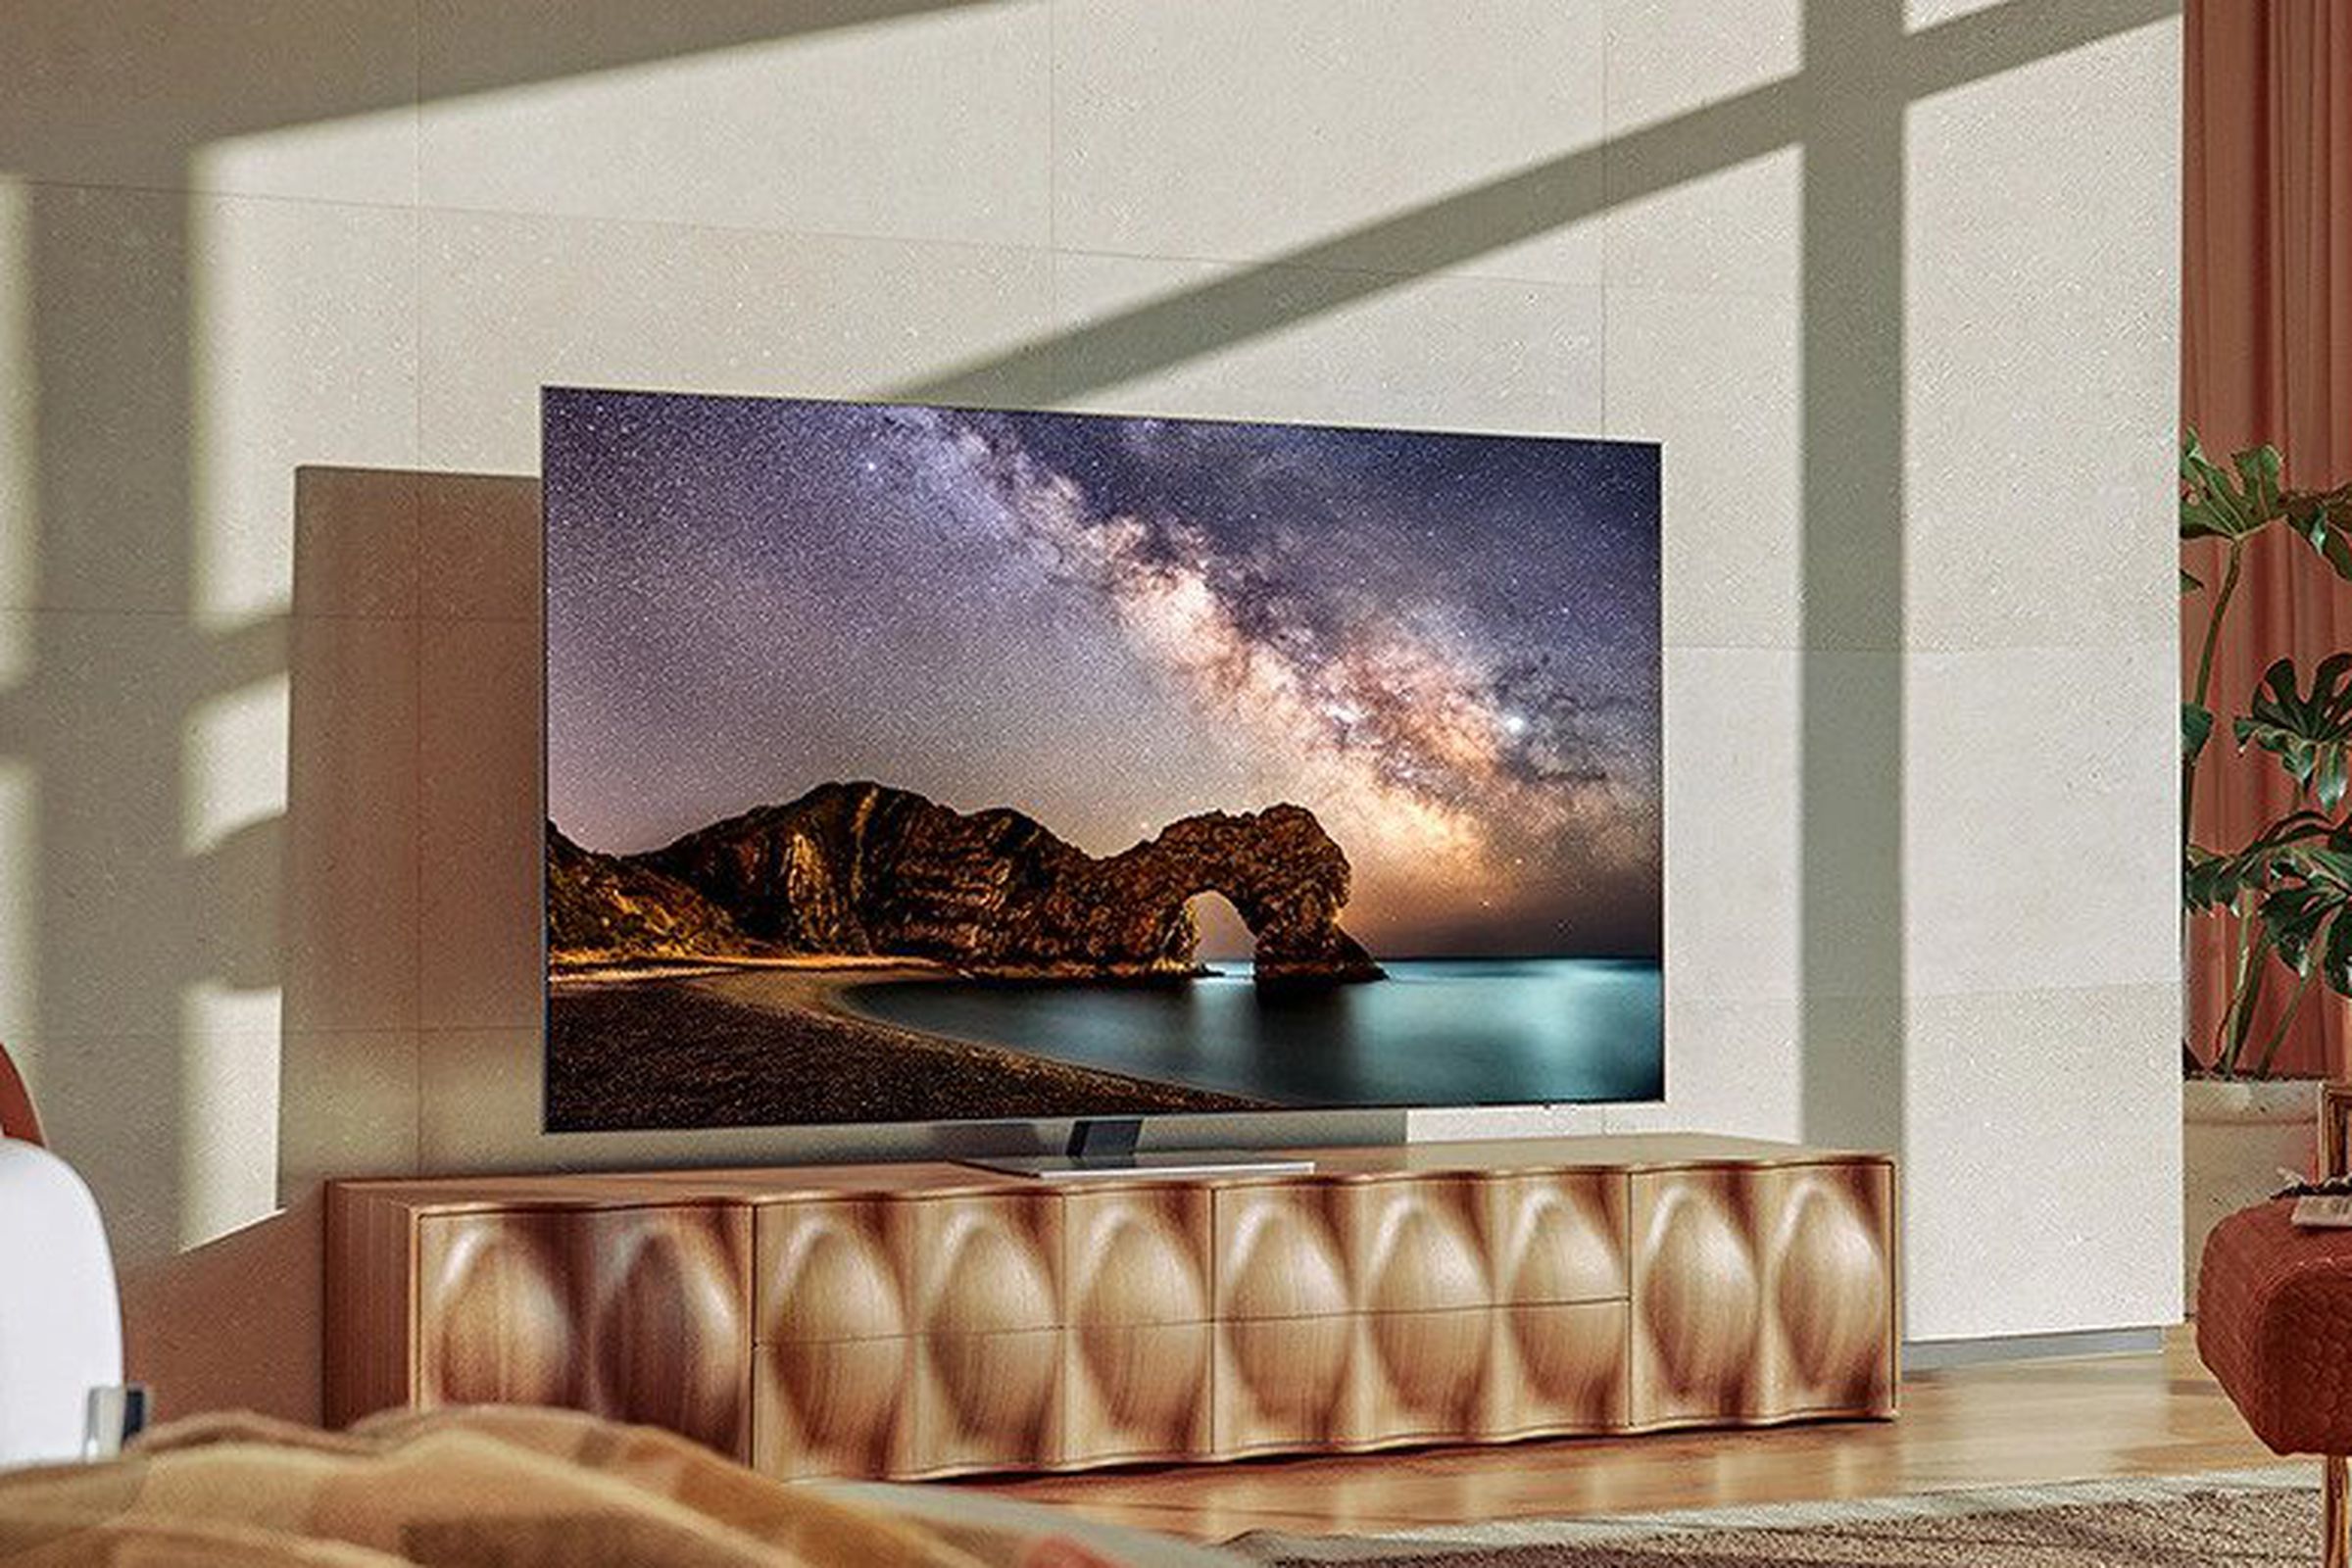 Save on this excellent QLED from Samsung